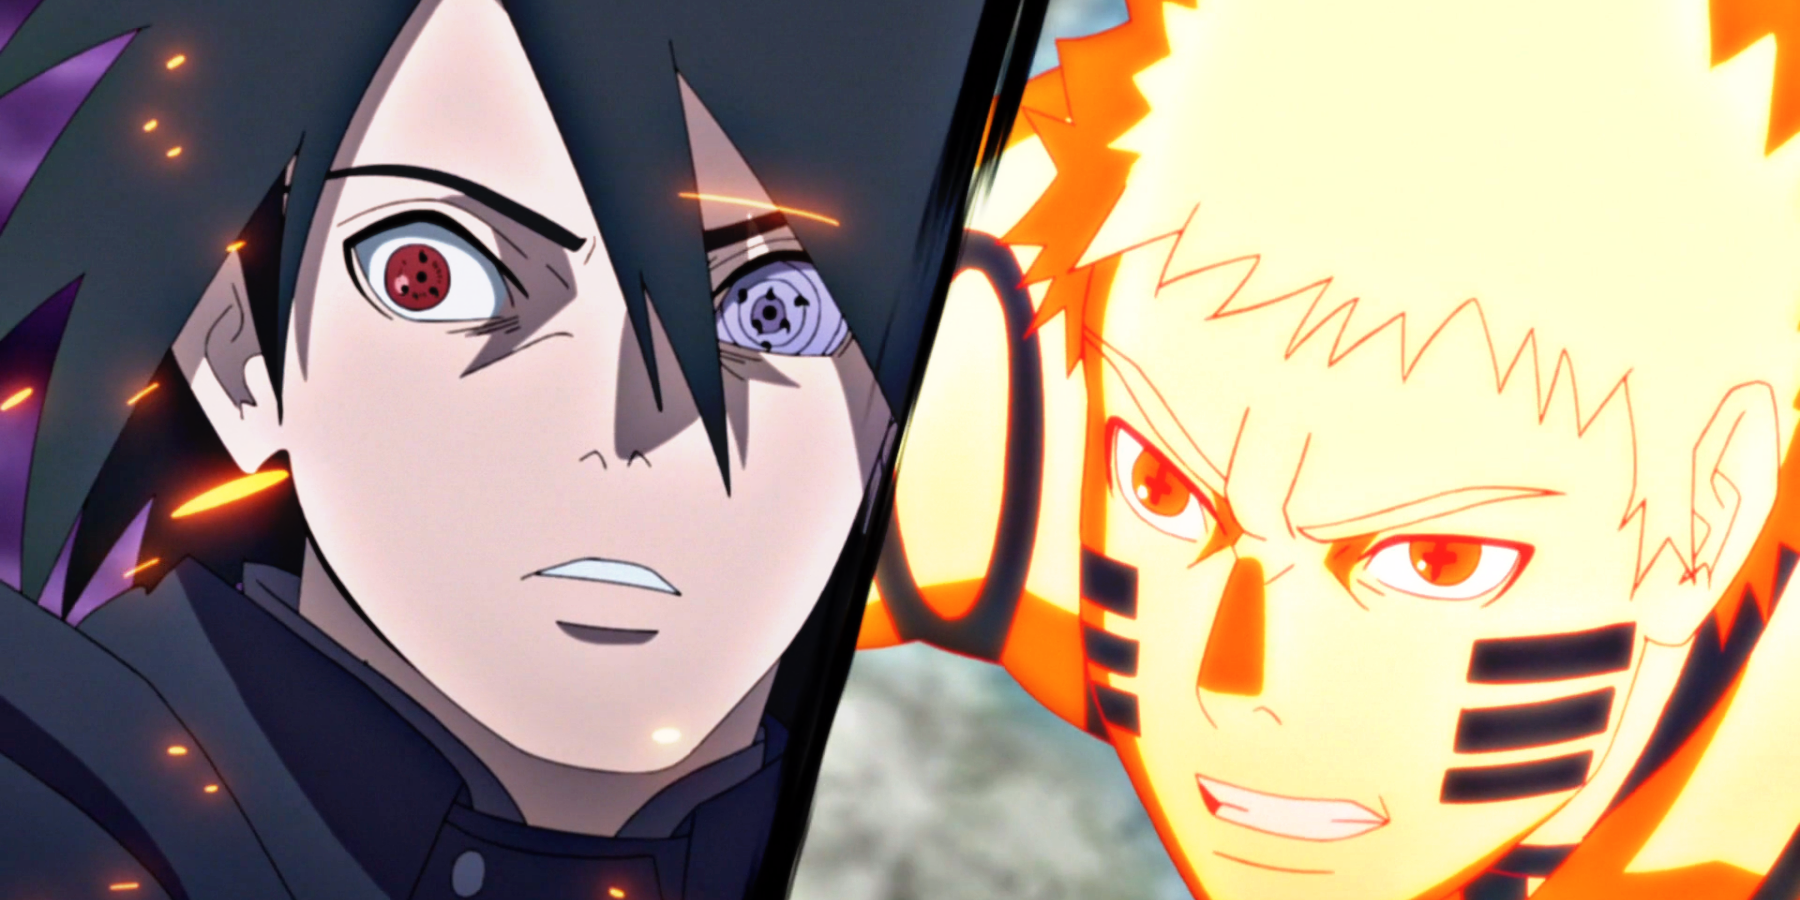 Boruto Chapter 73: Release Date, Spoilers, and Other Details